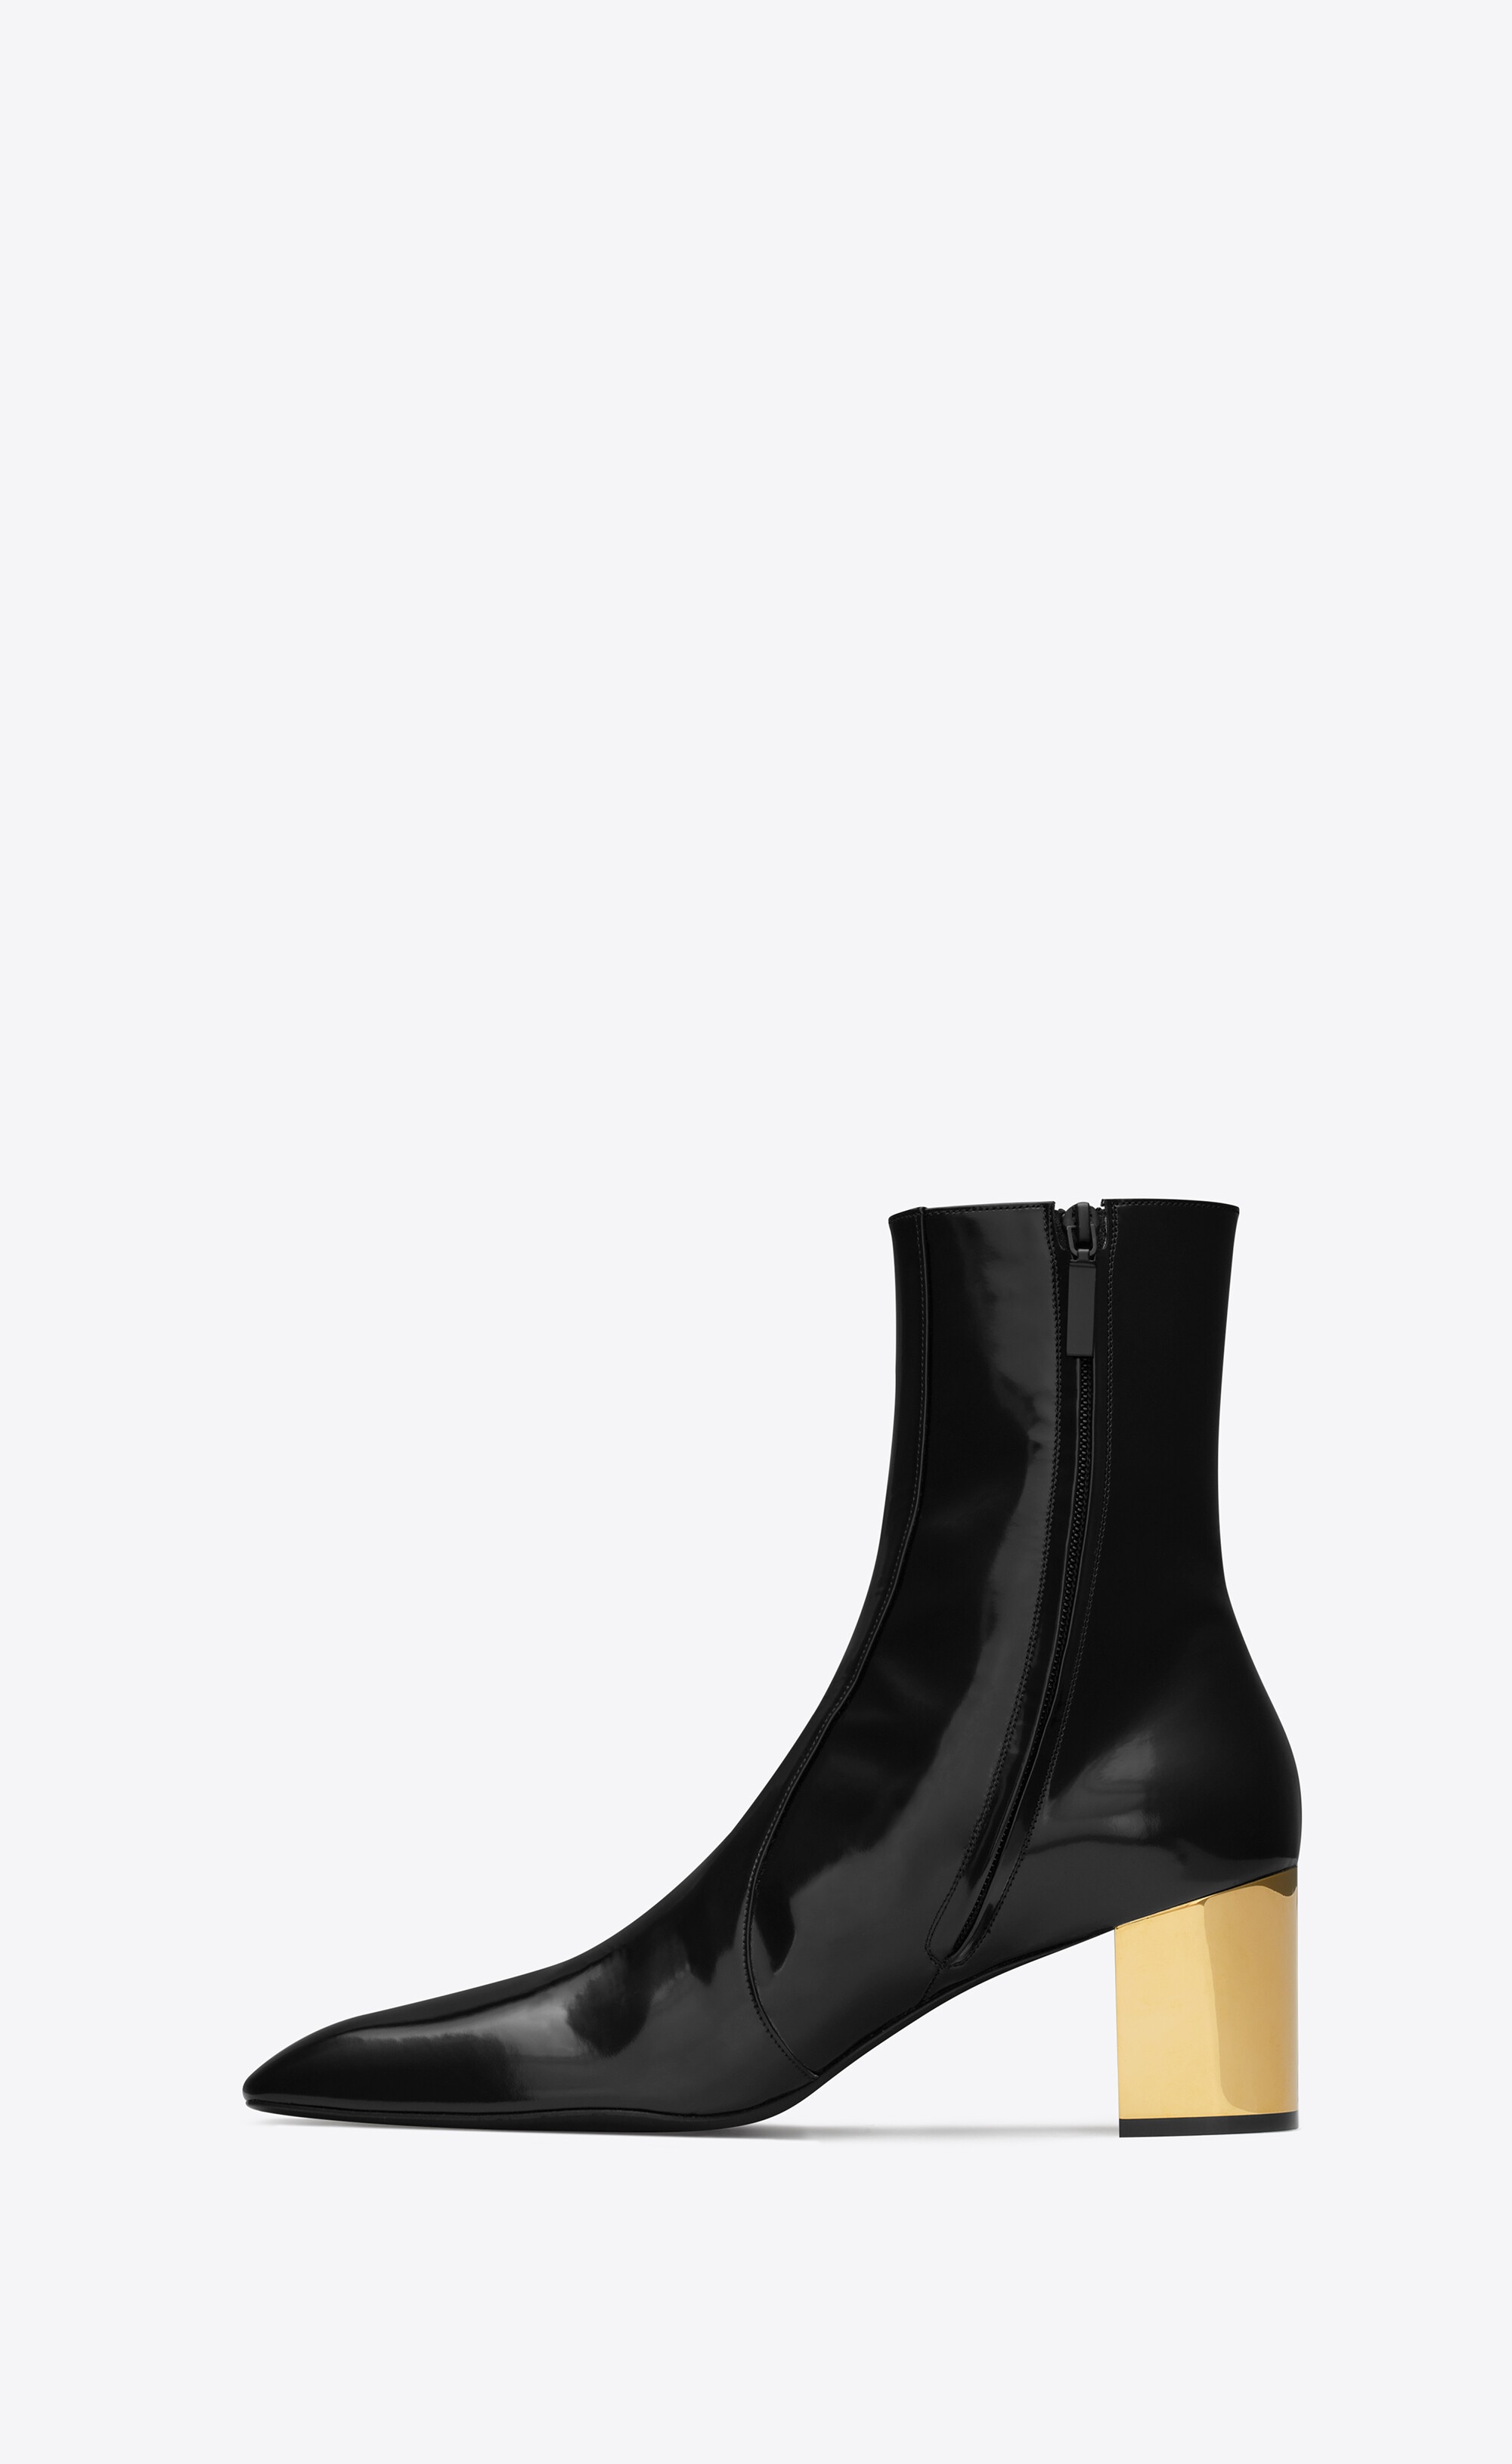 xiv zipped boots in glazed leather - 3